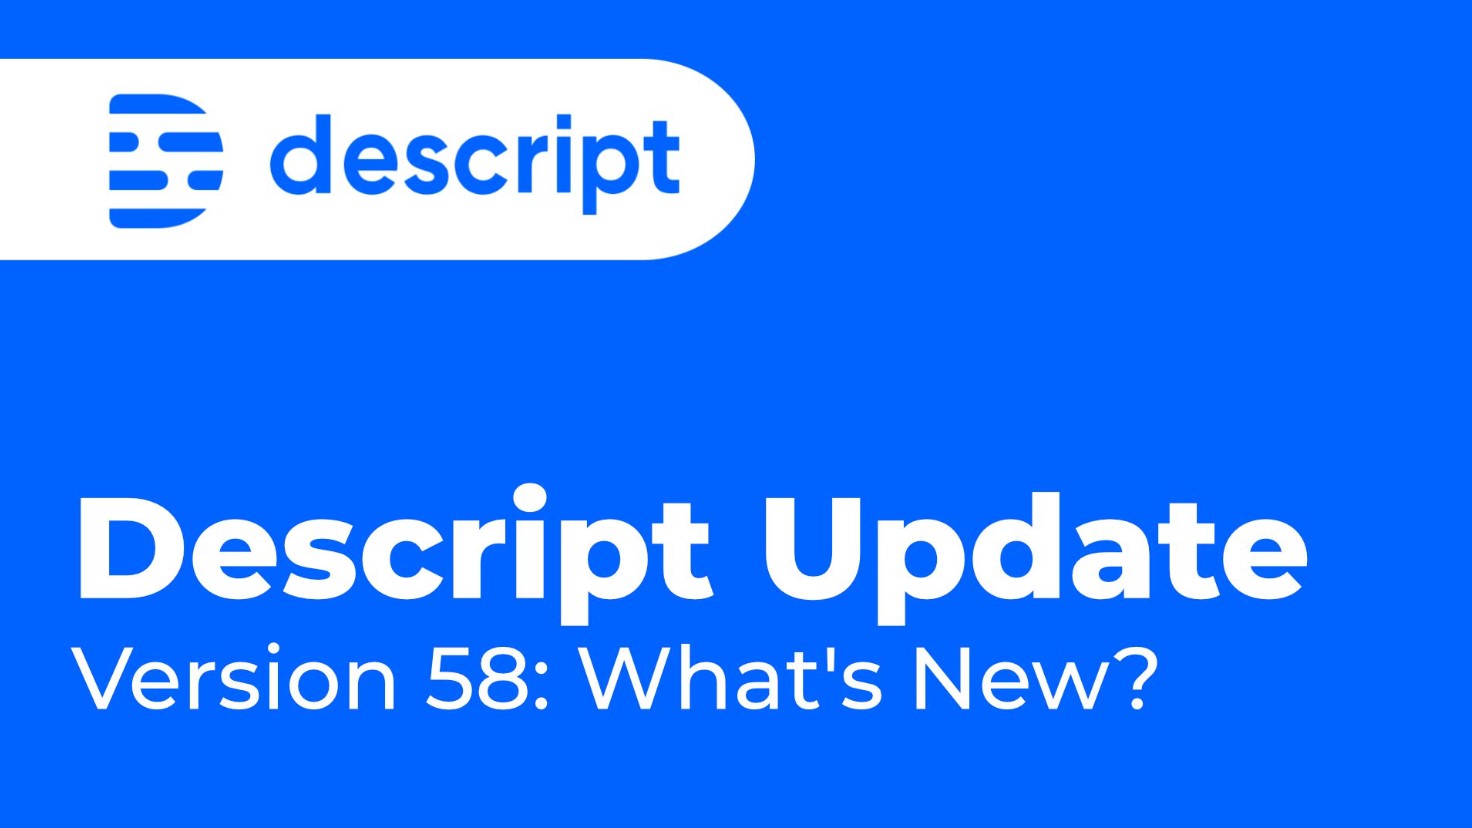 What's New in Descript Storyboard version 58